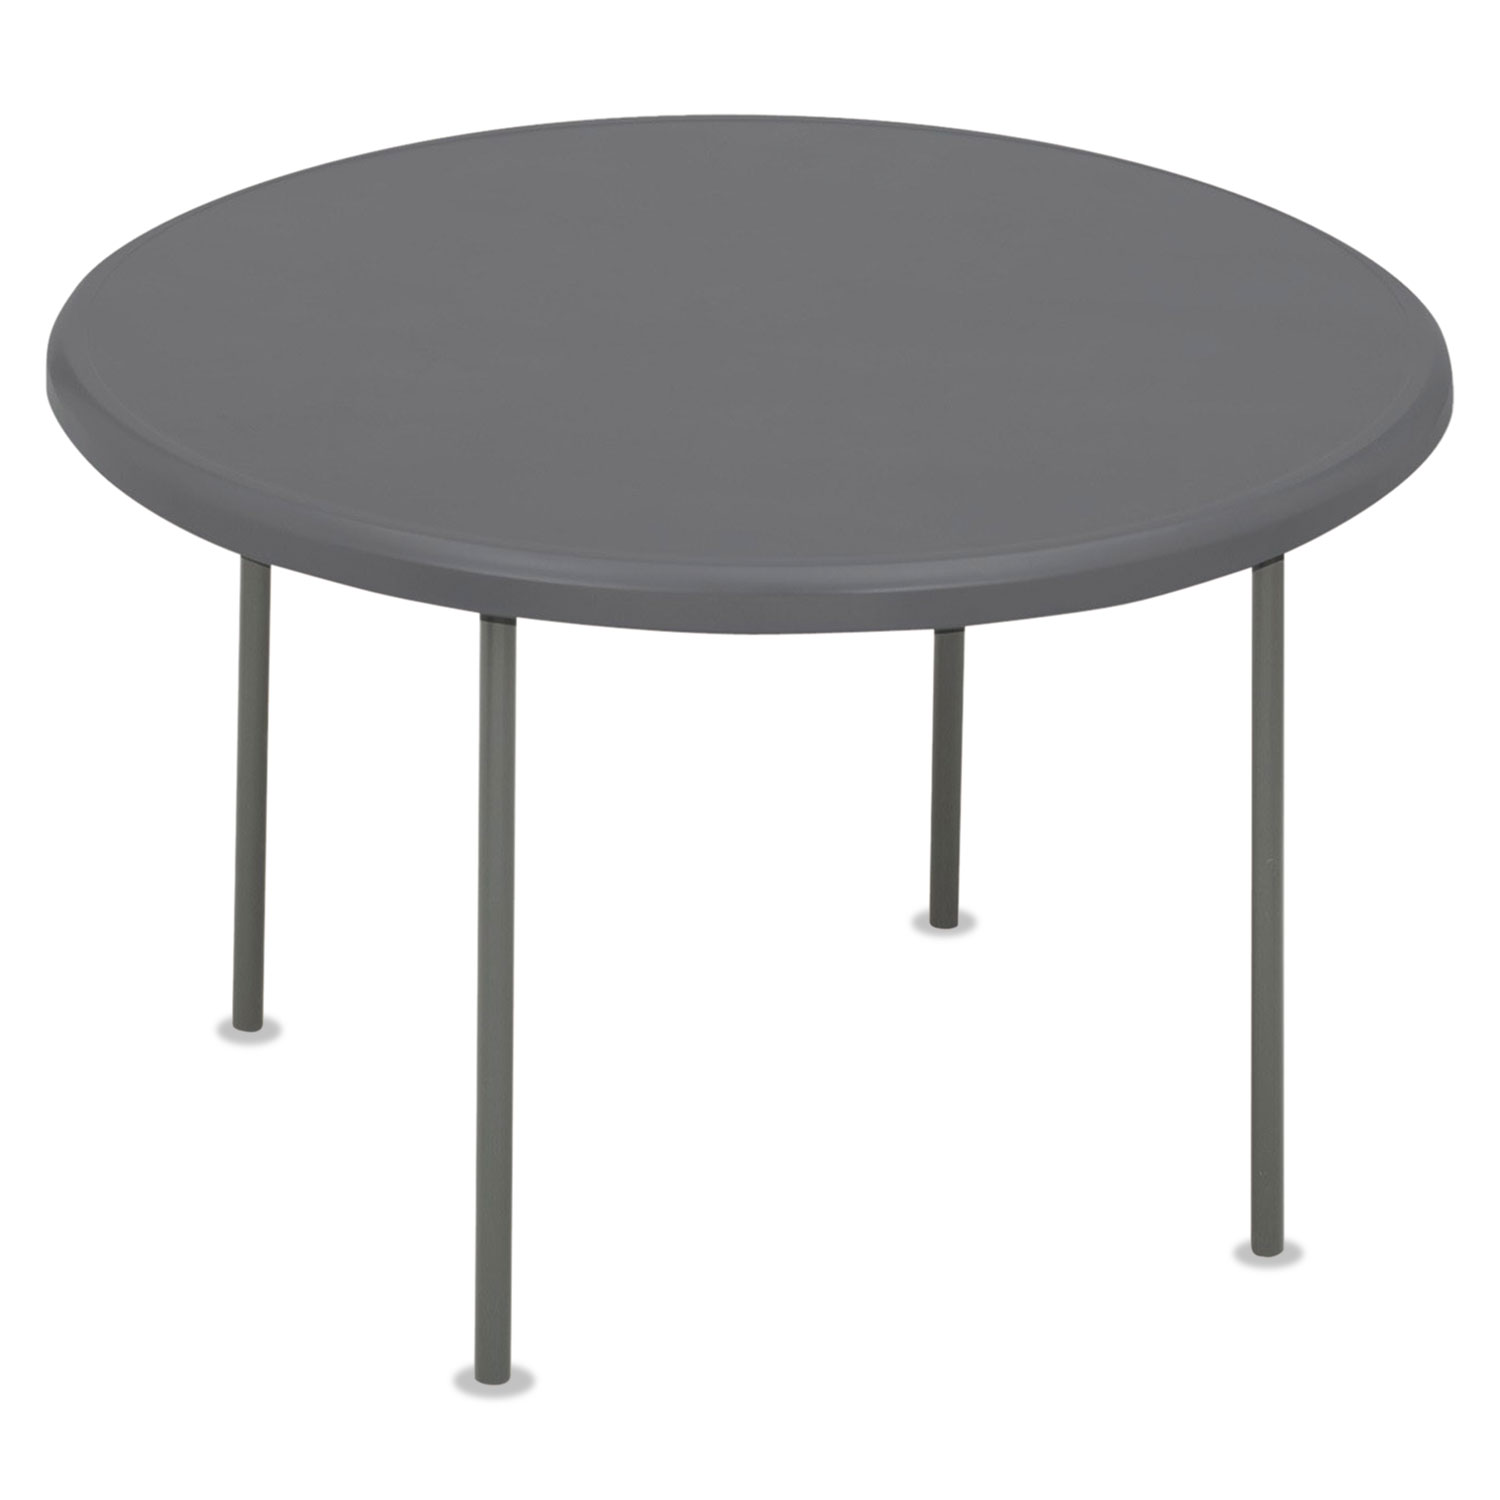 IndestrucTables Too 1200 Series Resin Folding Table, 60 dia x 29h, Charcoal